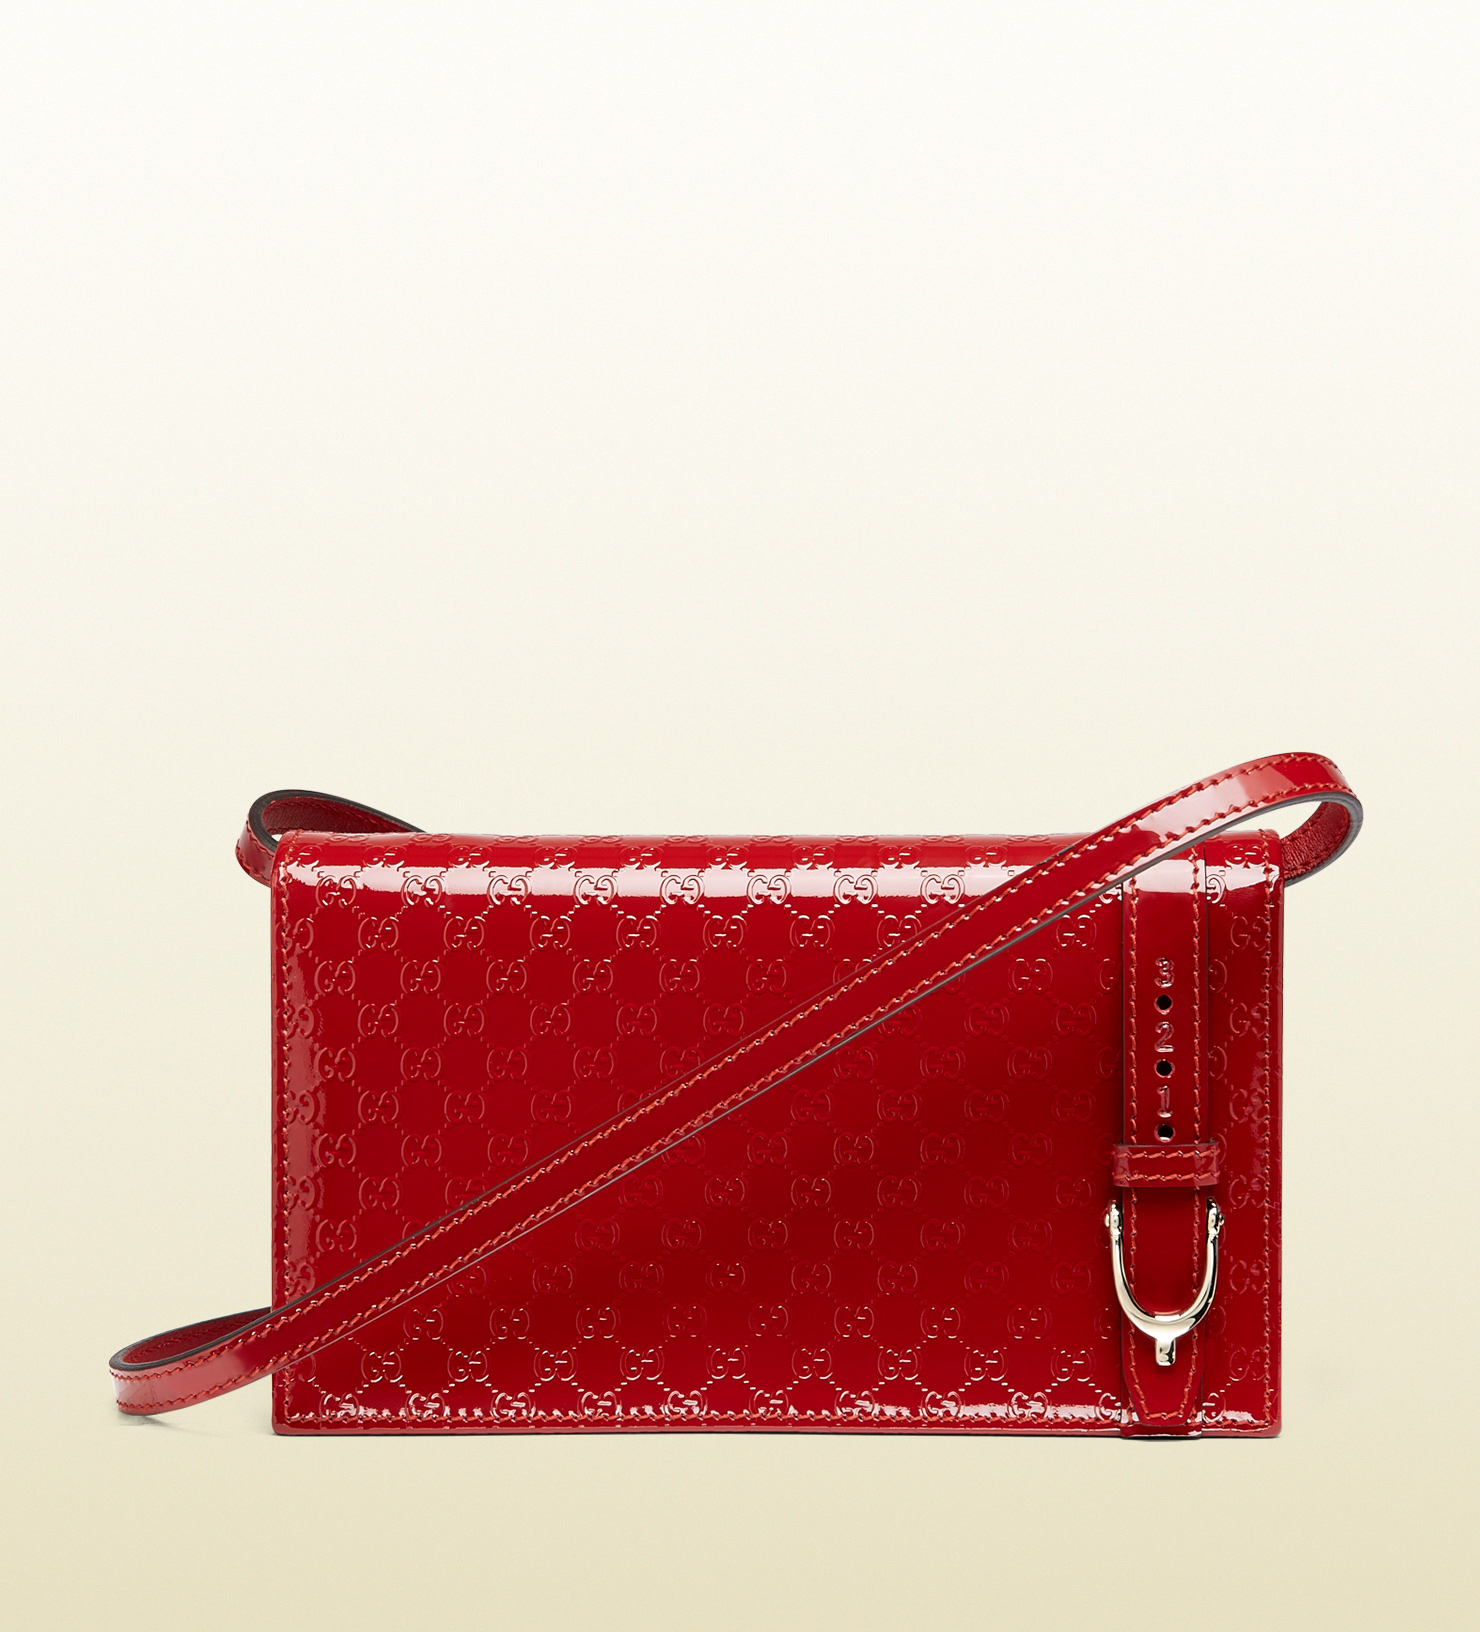 Gucci Nice Microssima Patent Leather Wallet Handbag in Red | Lyst